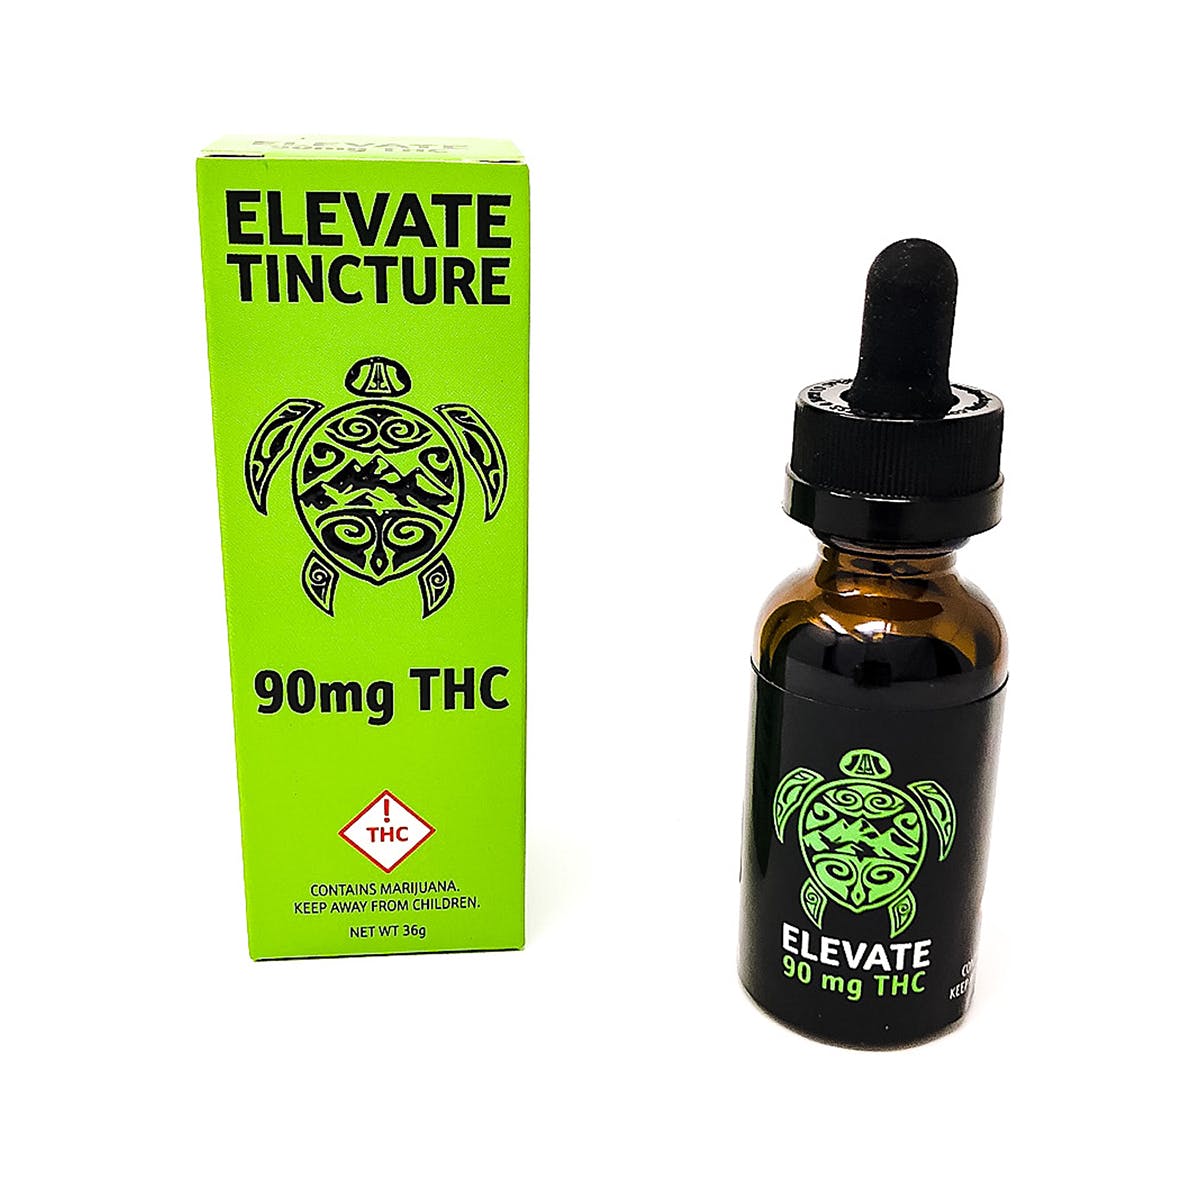 Elevate Tincture 90mg